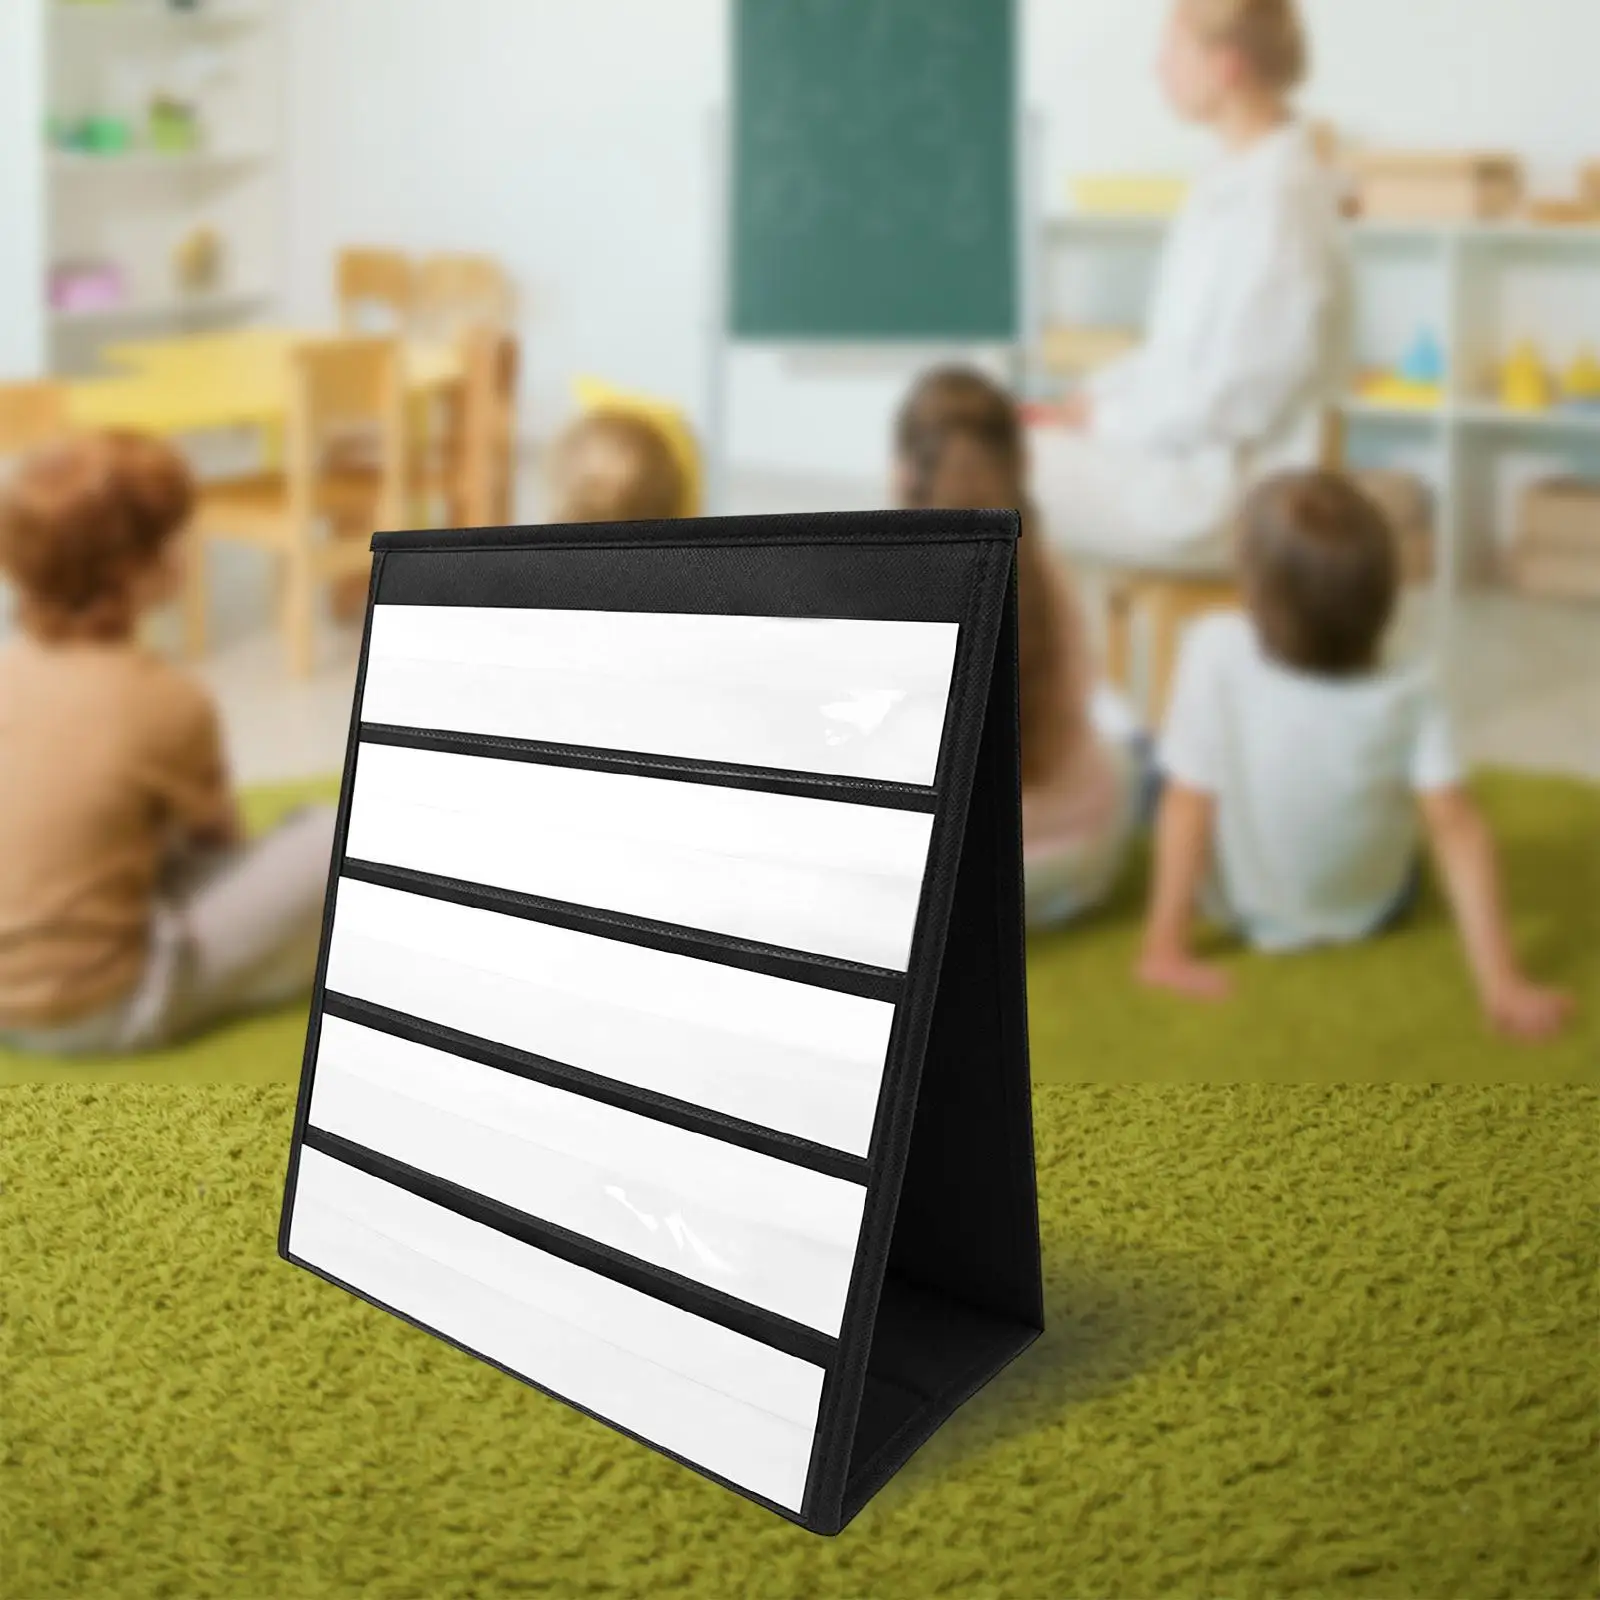 Tabletop Pocket Chart with 20x Whiteboard Cards Reading Self Standing Educational Words black for Children Desktop